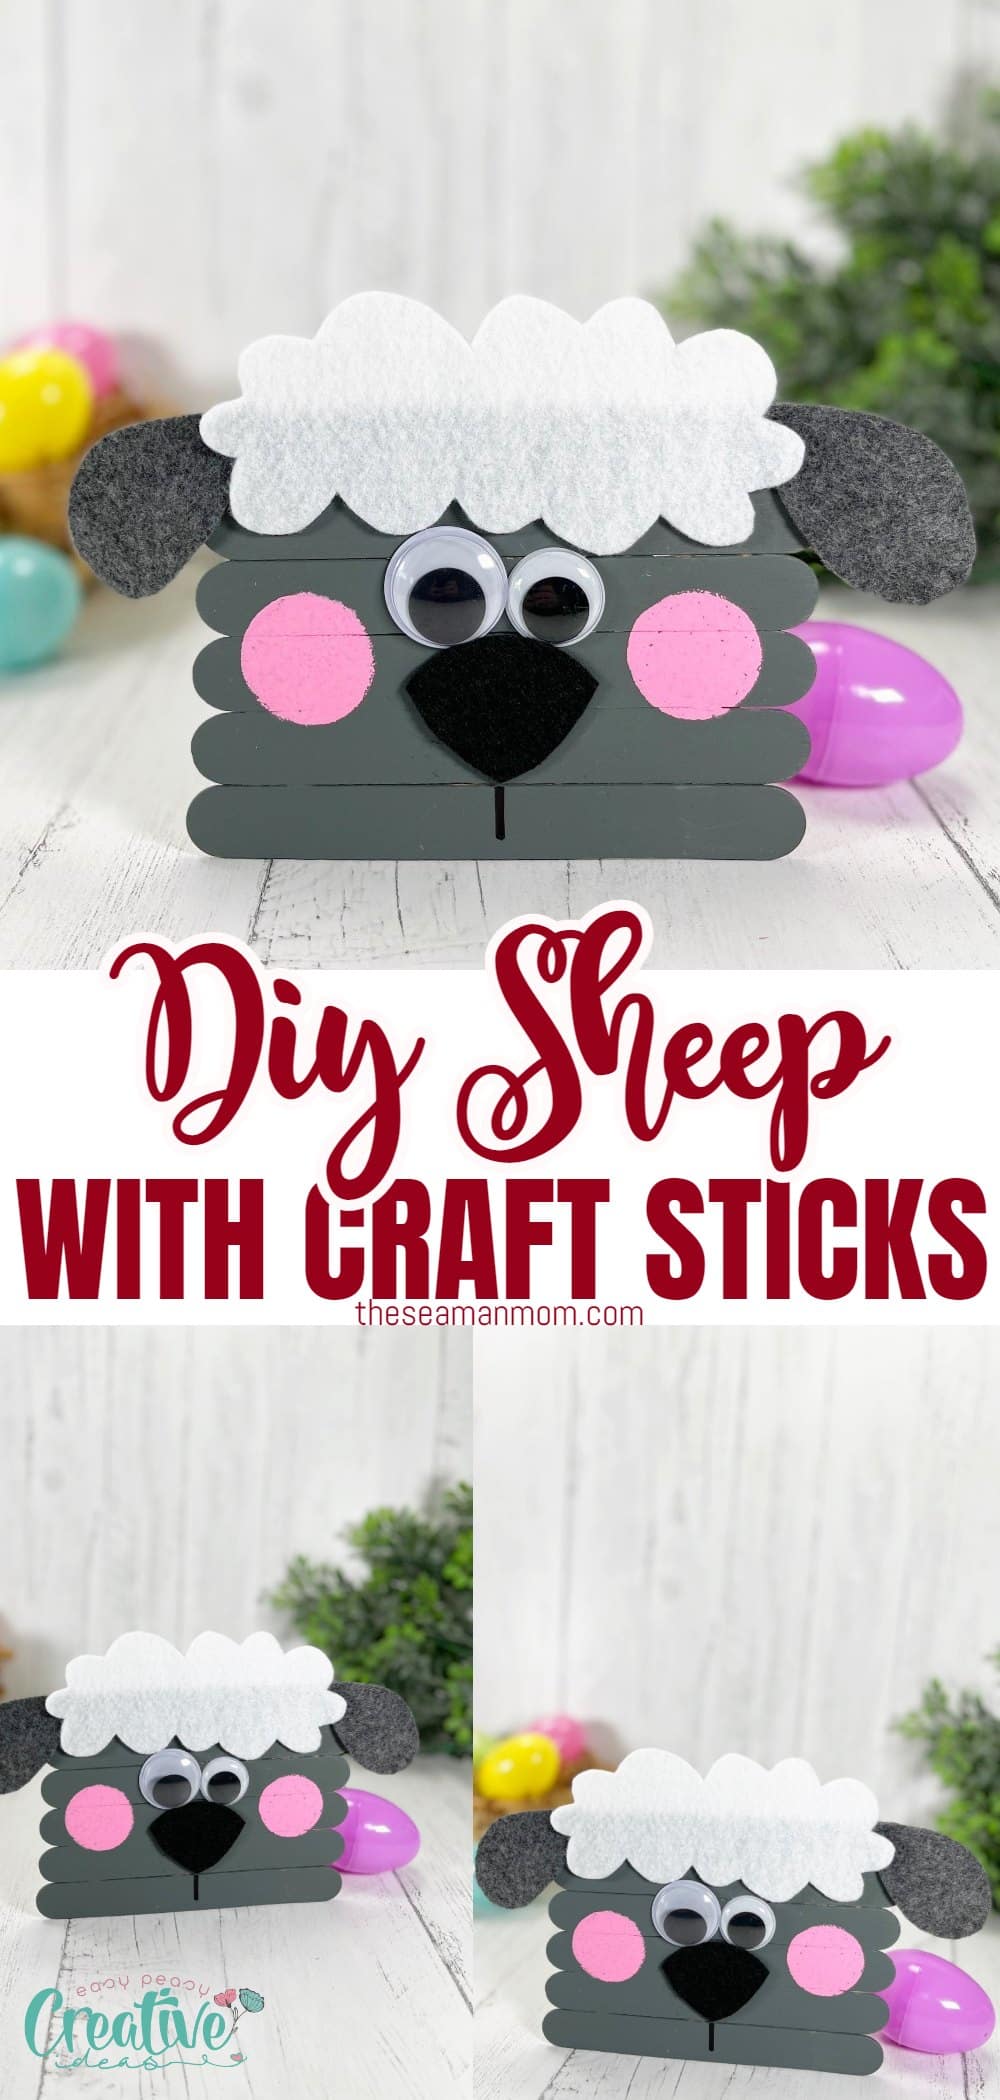 Bring your child's creativity to life with this delightful craft stick sheep craft! It's the perfect Easter project, or can be done anytime for a fun and easy activity that kids will love. via @petroneagu